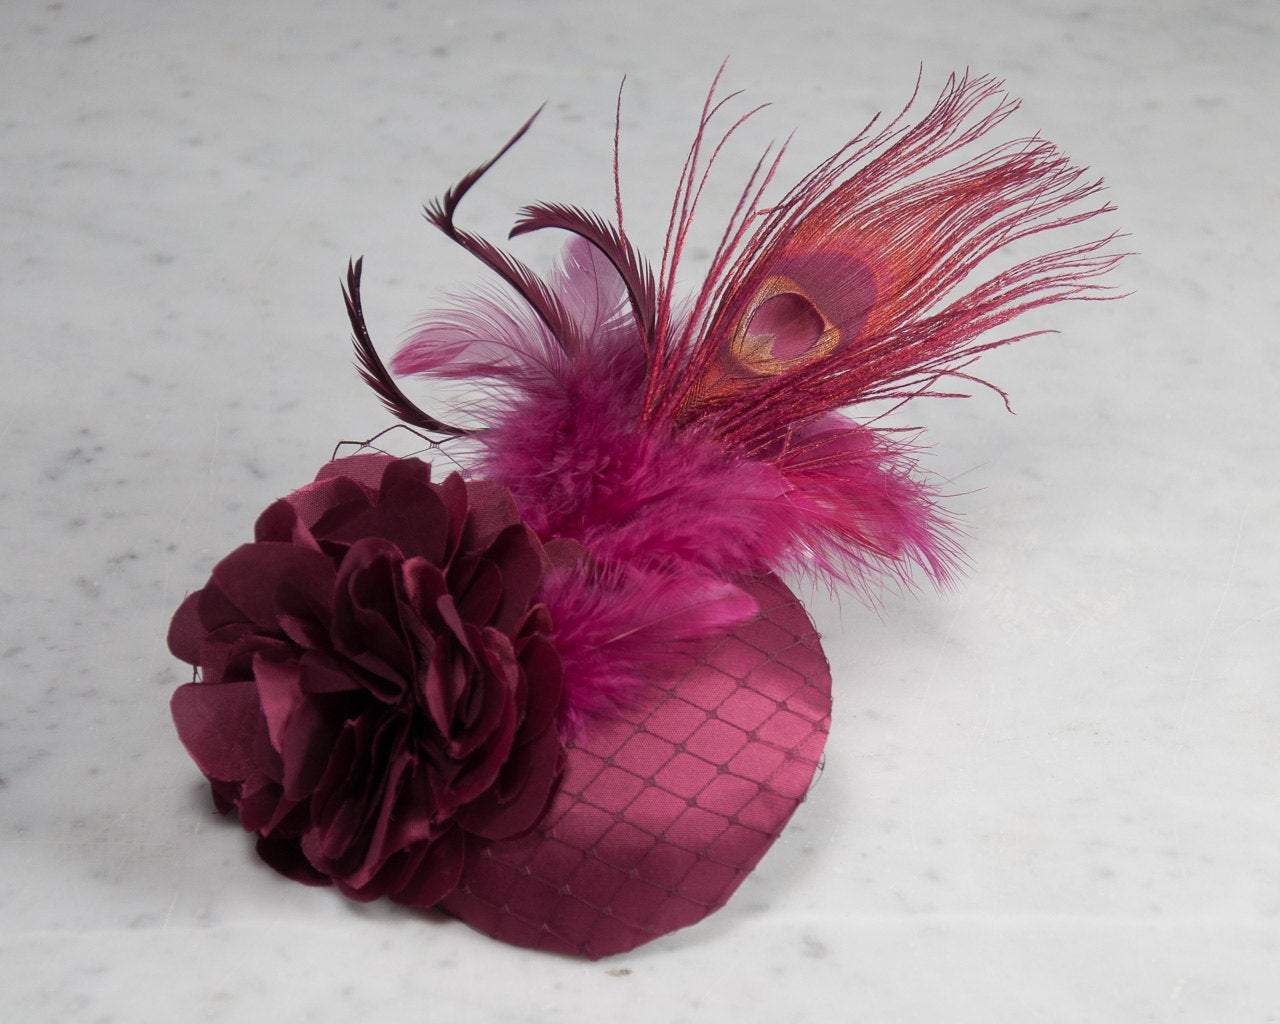 FASCINATOR - ELEGANT HAIR ACCESSORY IN SHINY RUBY RED WITH VEIL DETAILS © Seegang Berlin